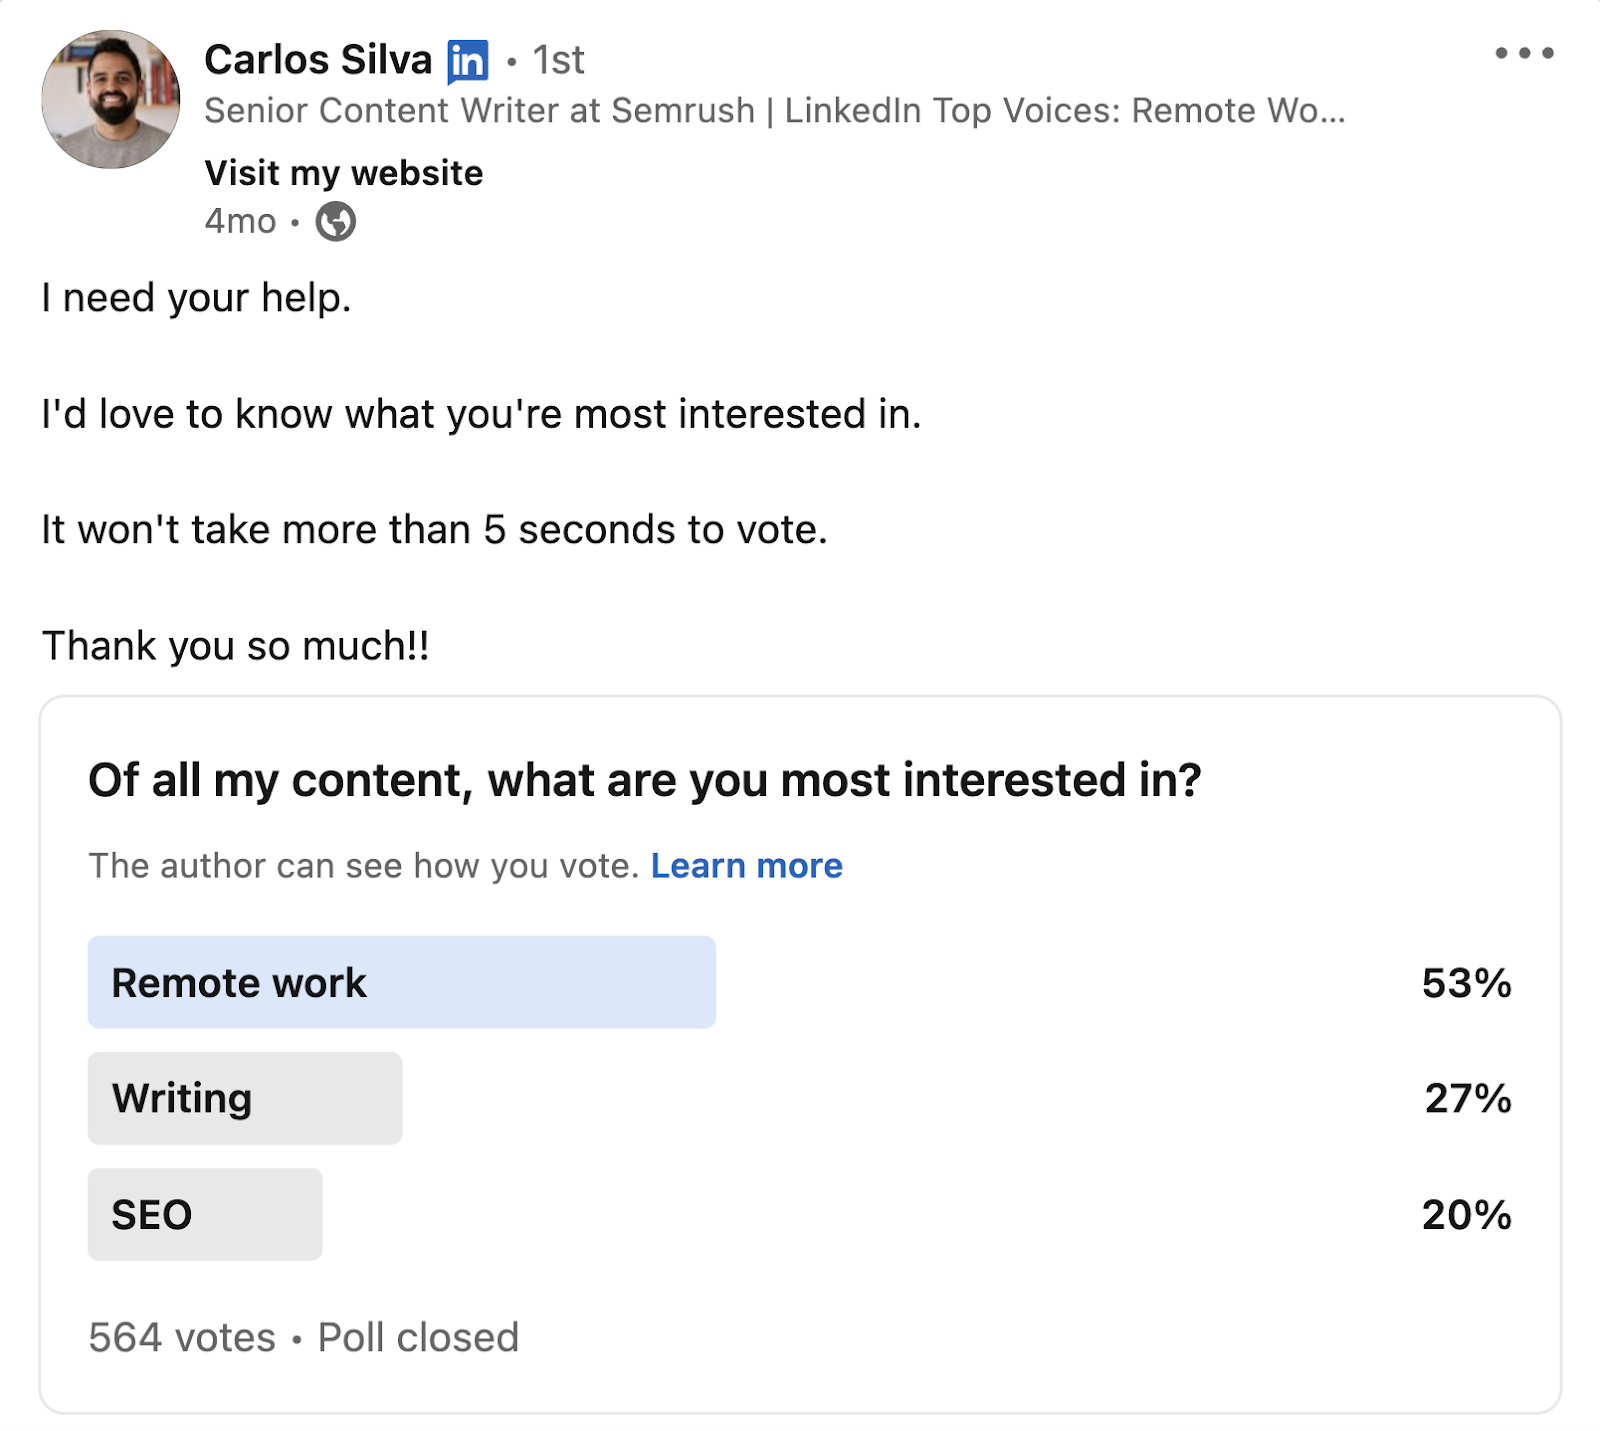 Carlos Silva's LinkedIn post including a poll asking users what kind of content they like to see